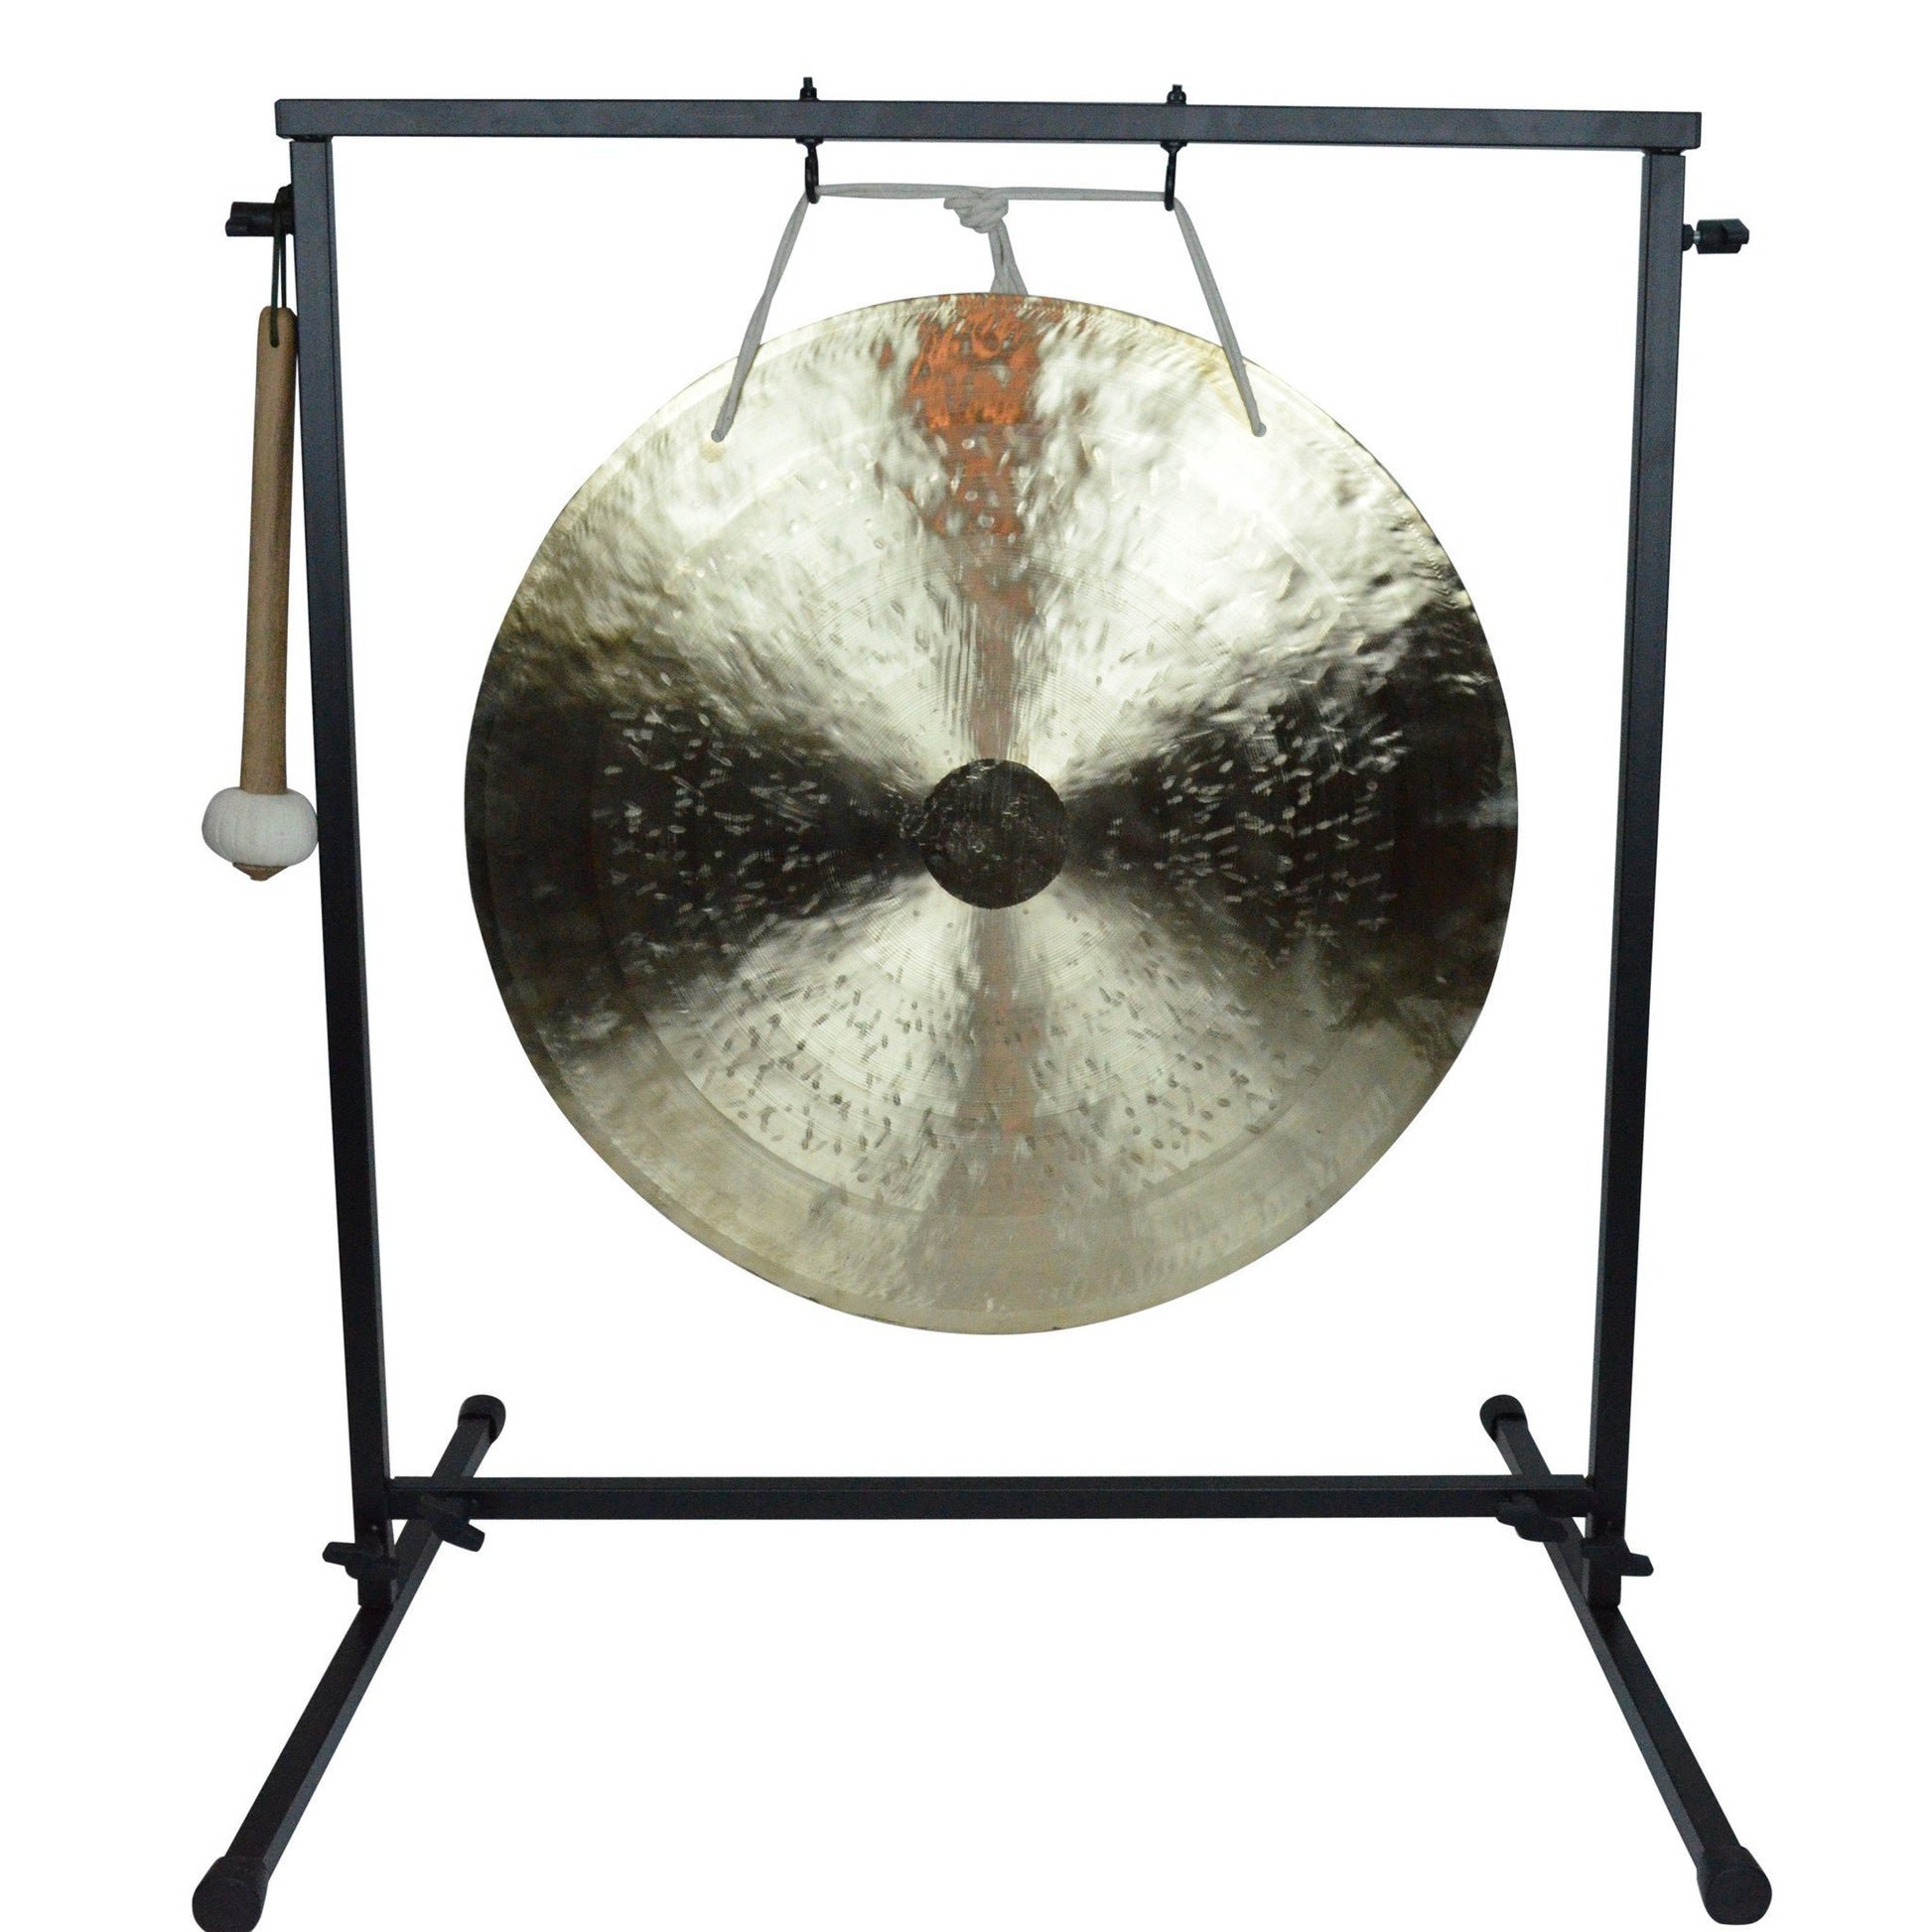 12” Chinese Chau Gong Set with Stand and Mallet